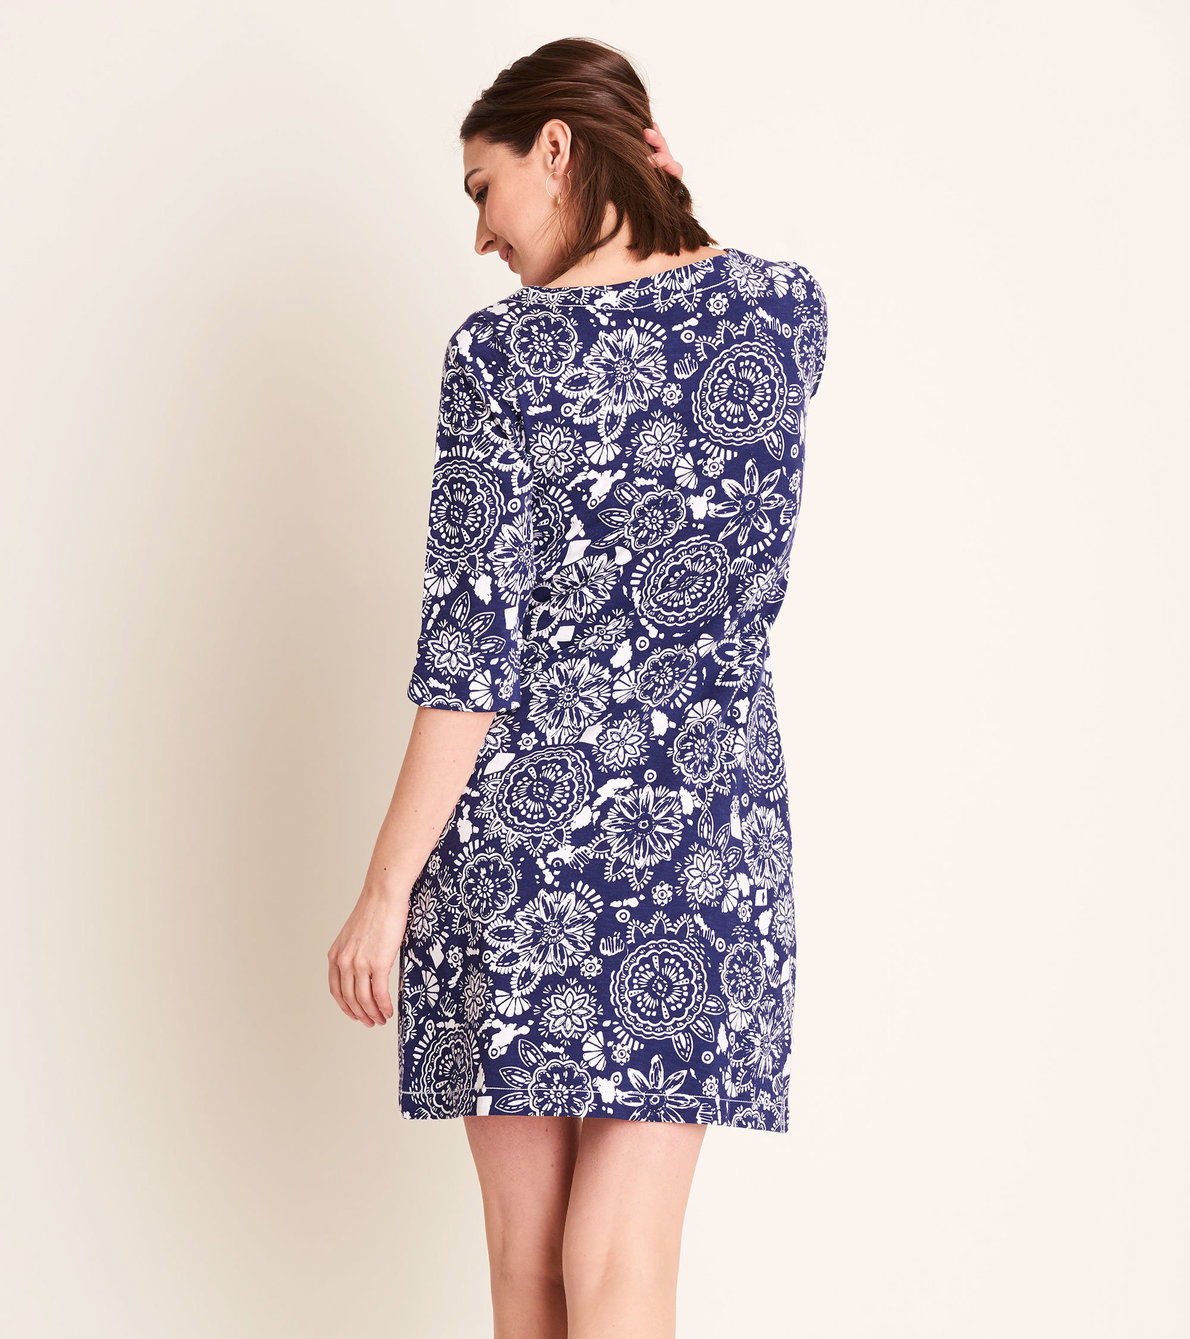 View larger image of Lucy Dress - Navy Mandala Flowers